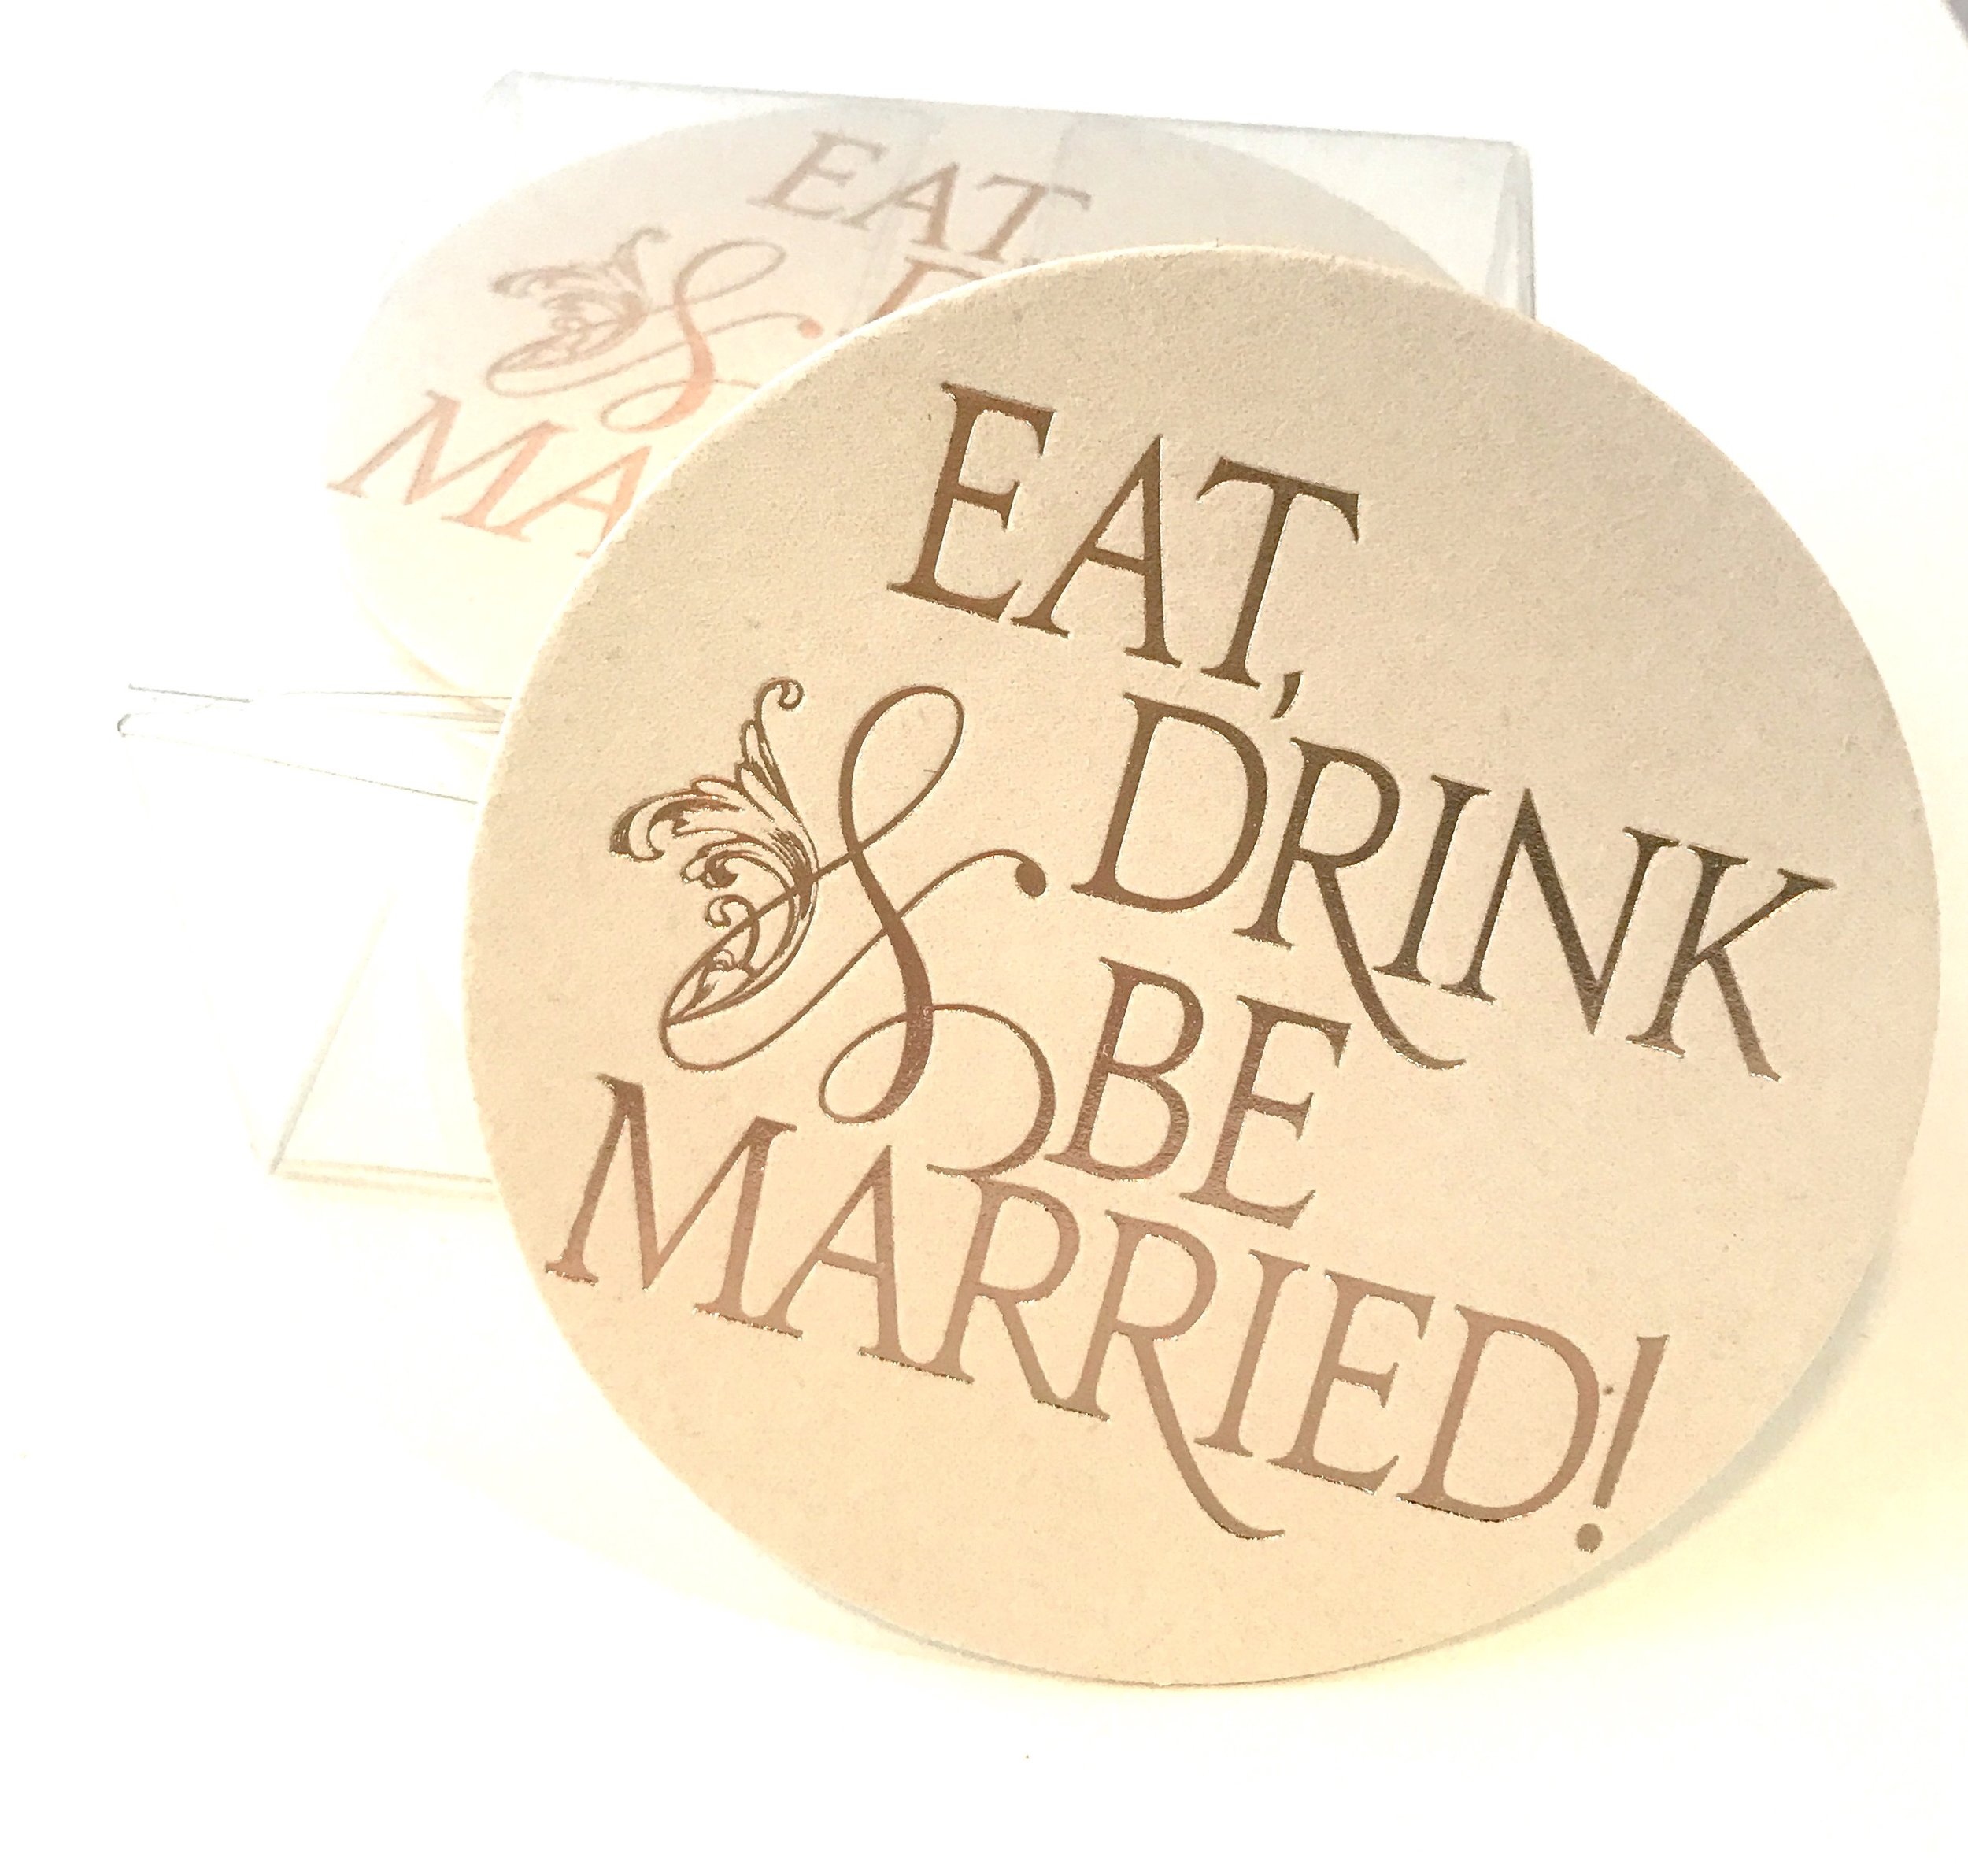 Eat drink and be married rose gold.JPG